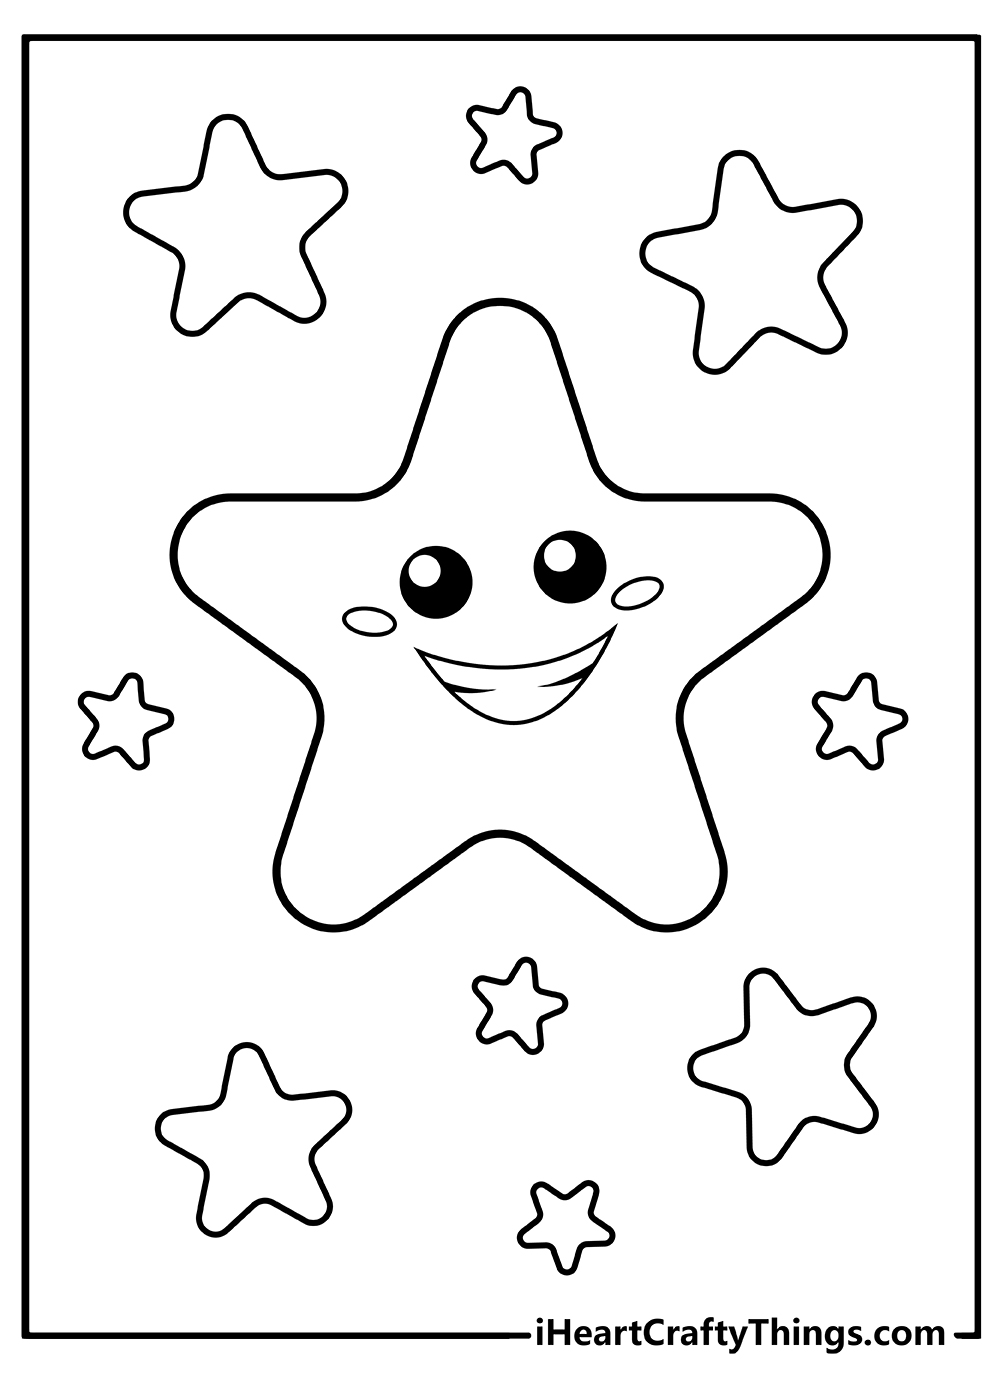 Star Coloring Pages free print out